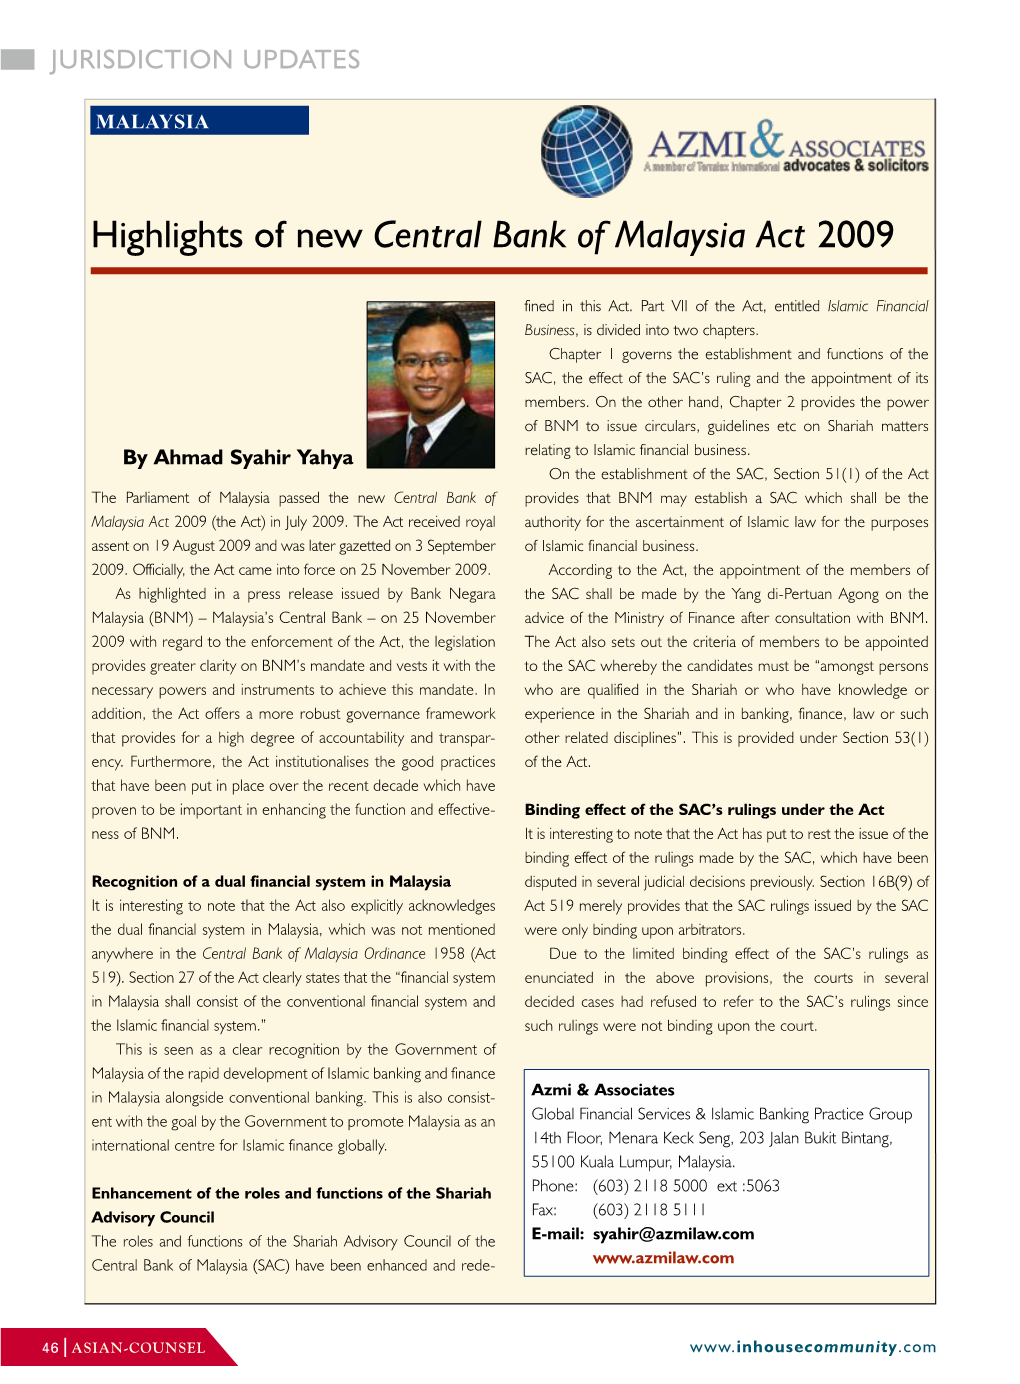 Highlights of New Central Bank of Malaysia Act 2009